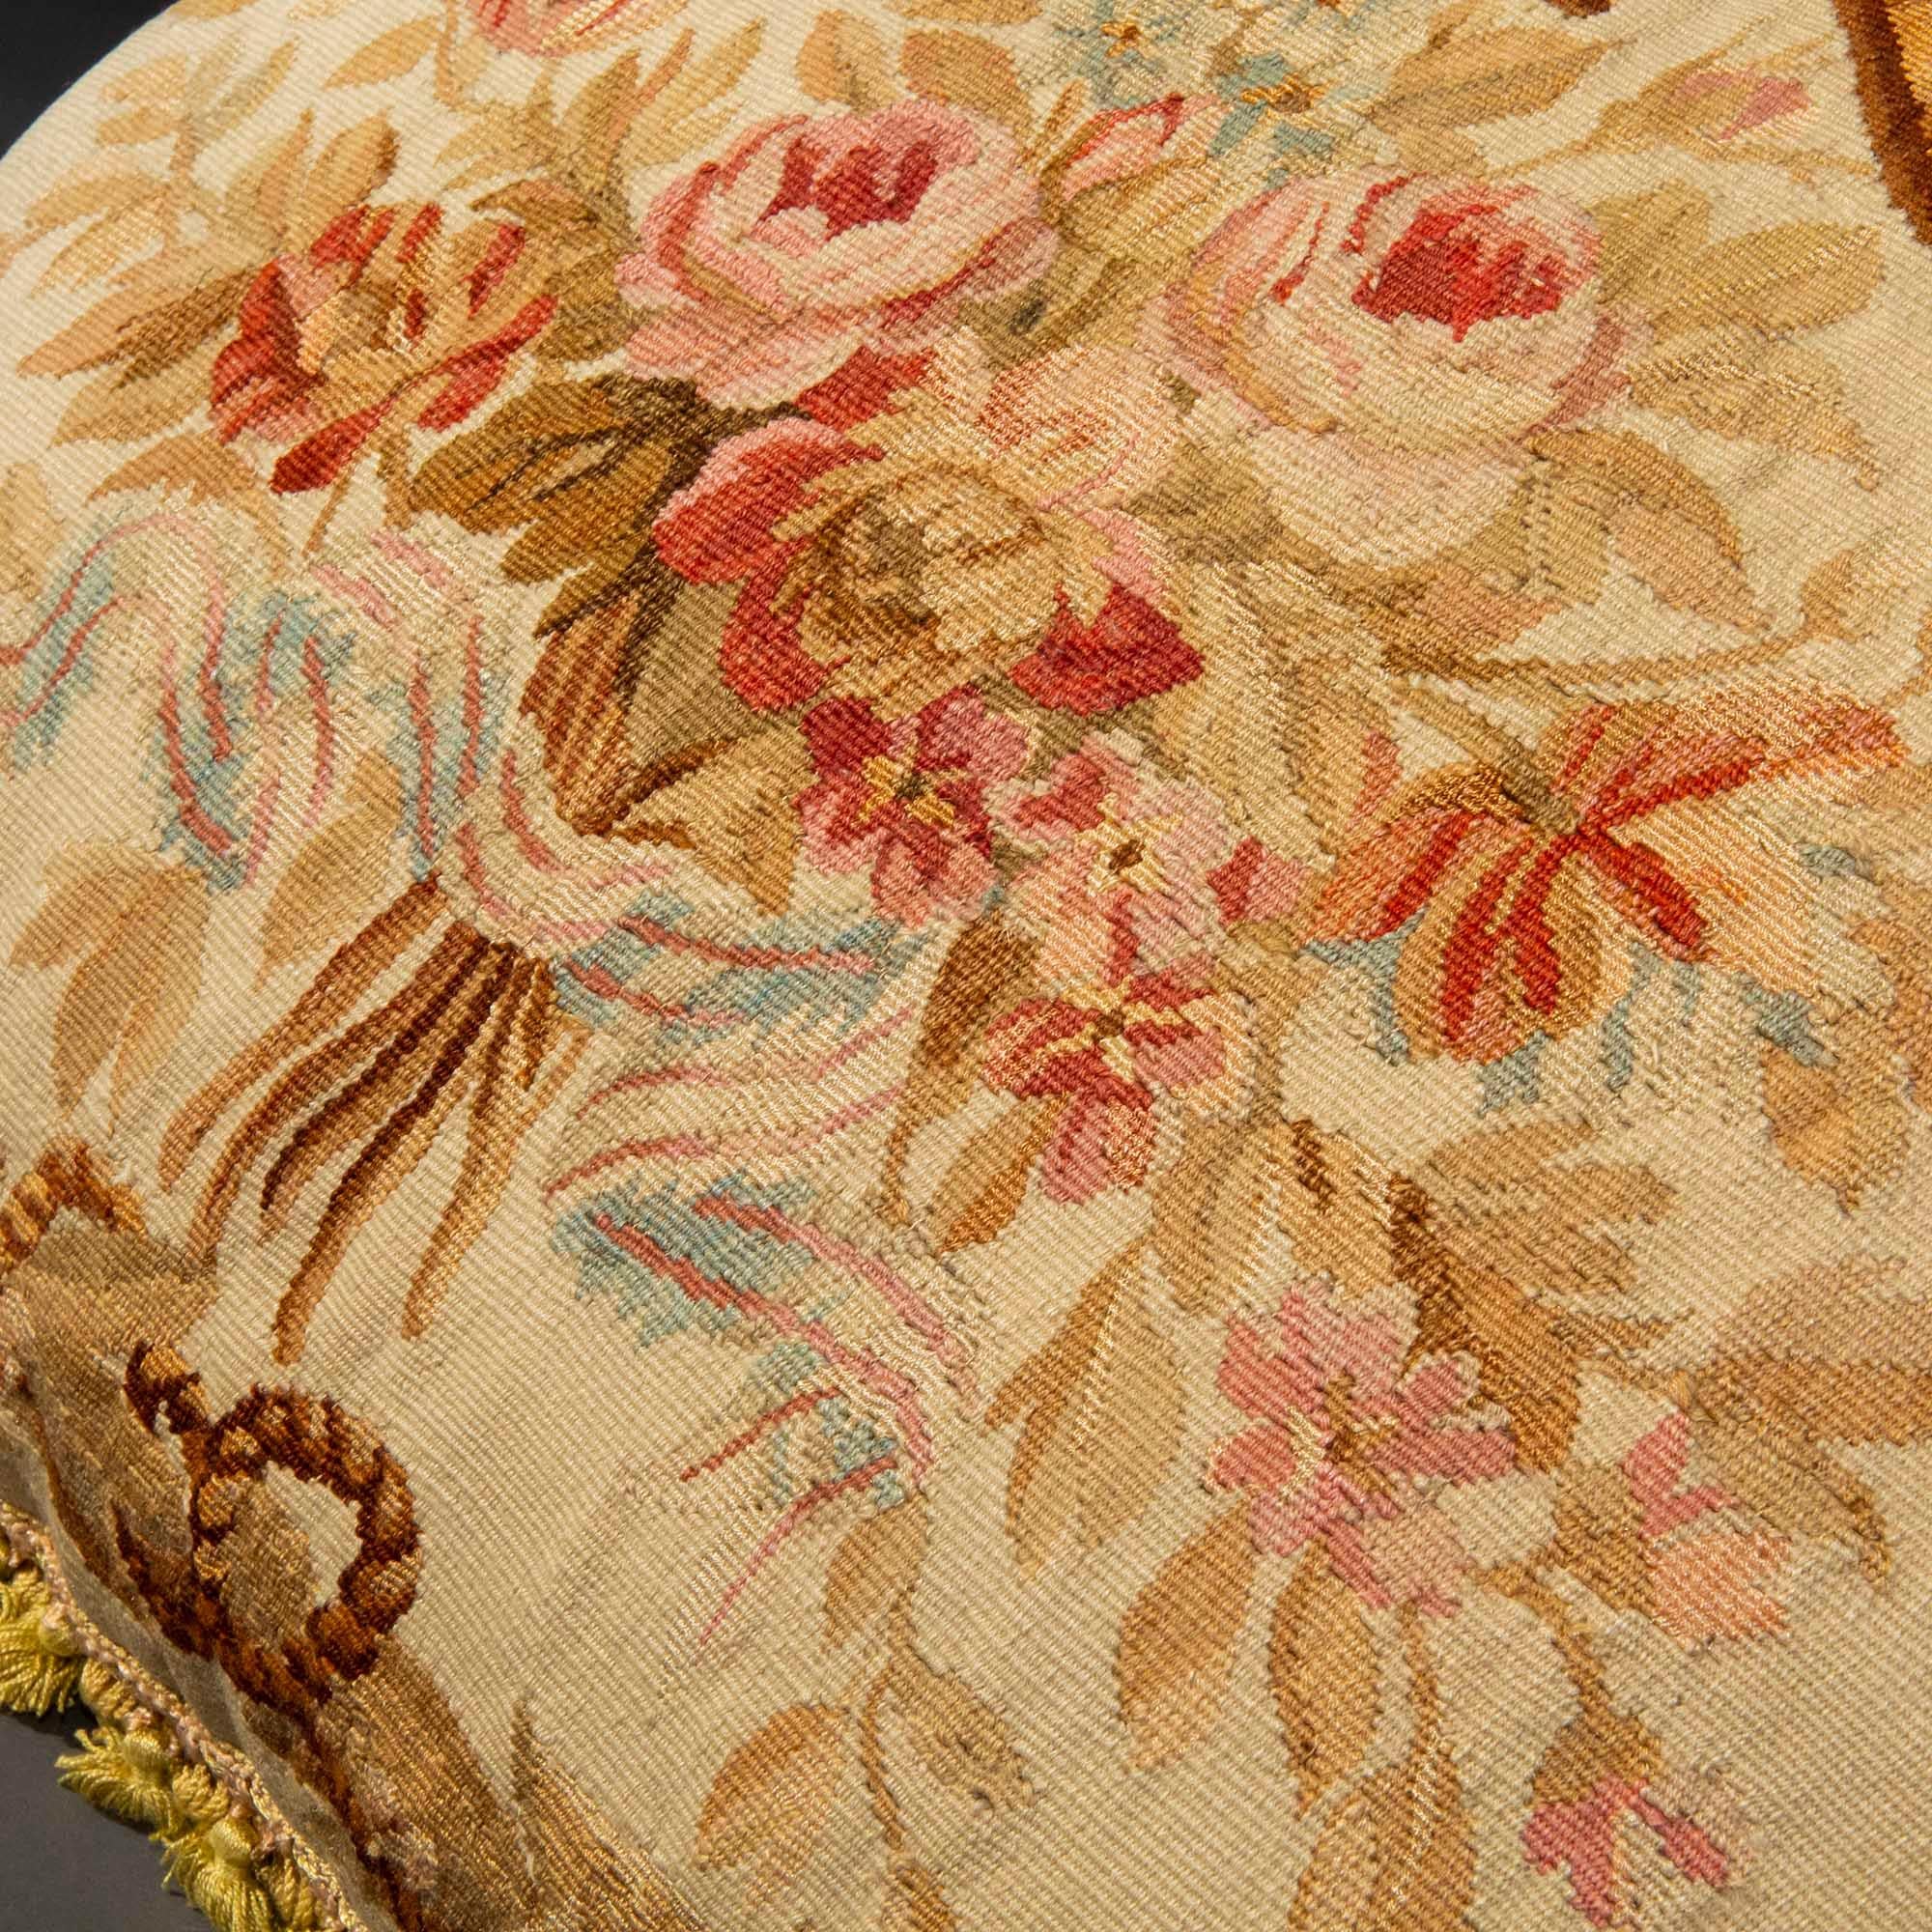 Large Aubusson Tapestry Pillow or Cushion, 18th Century 4